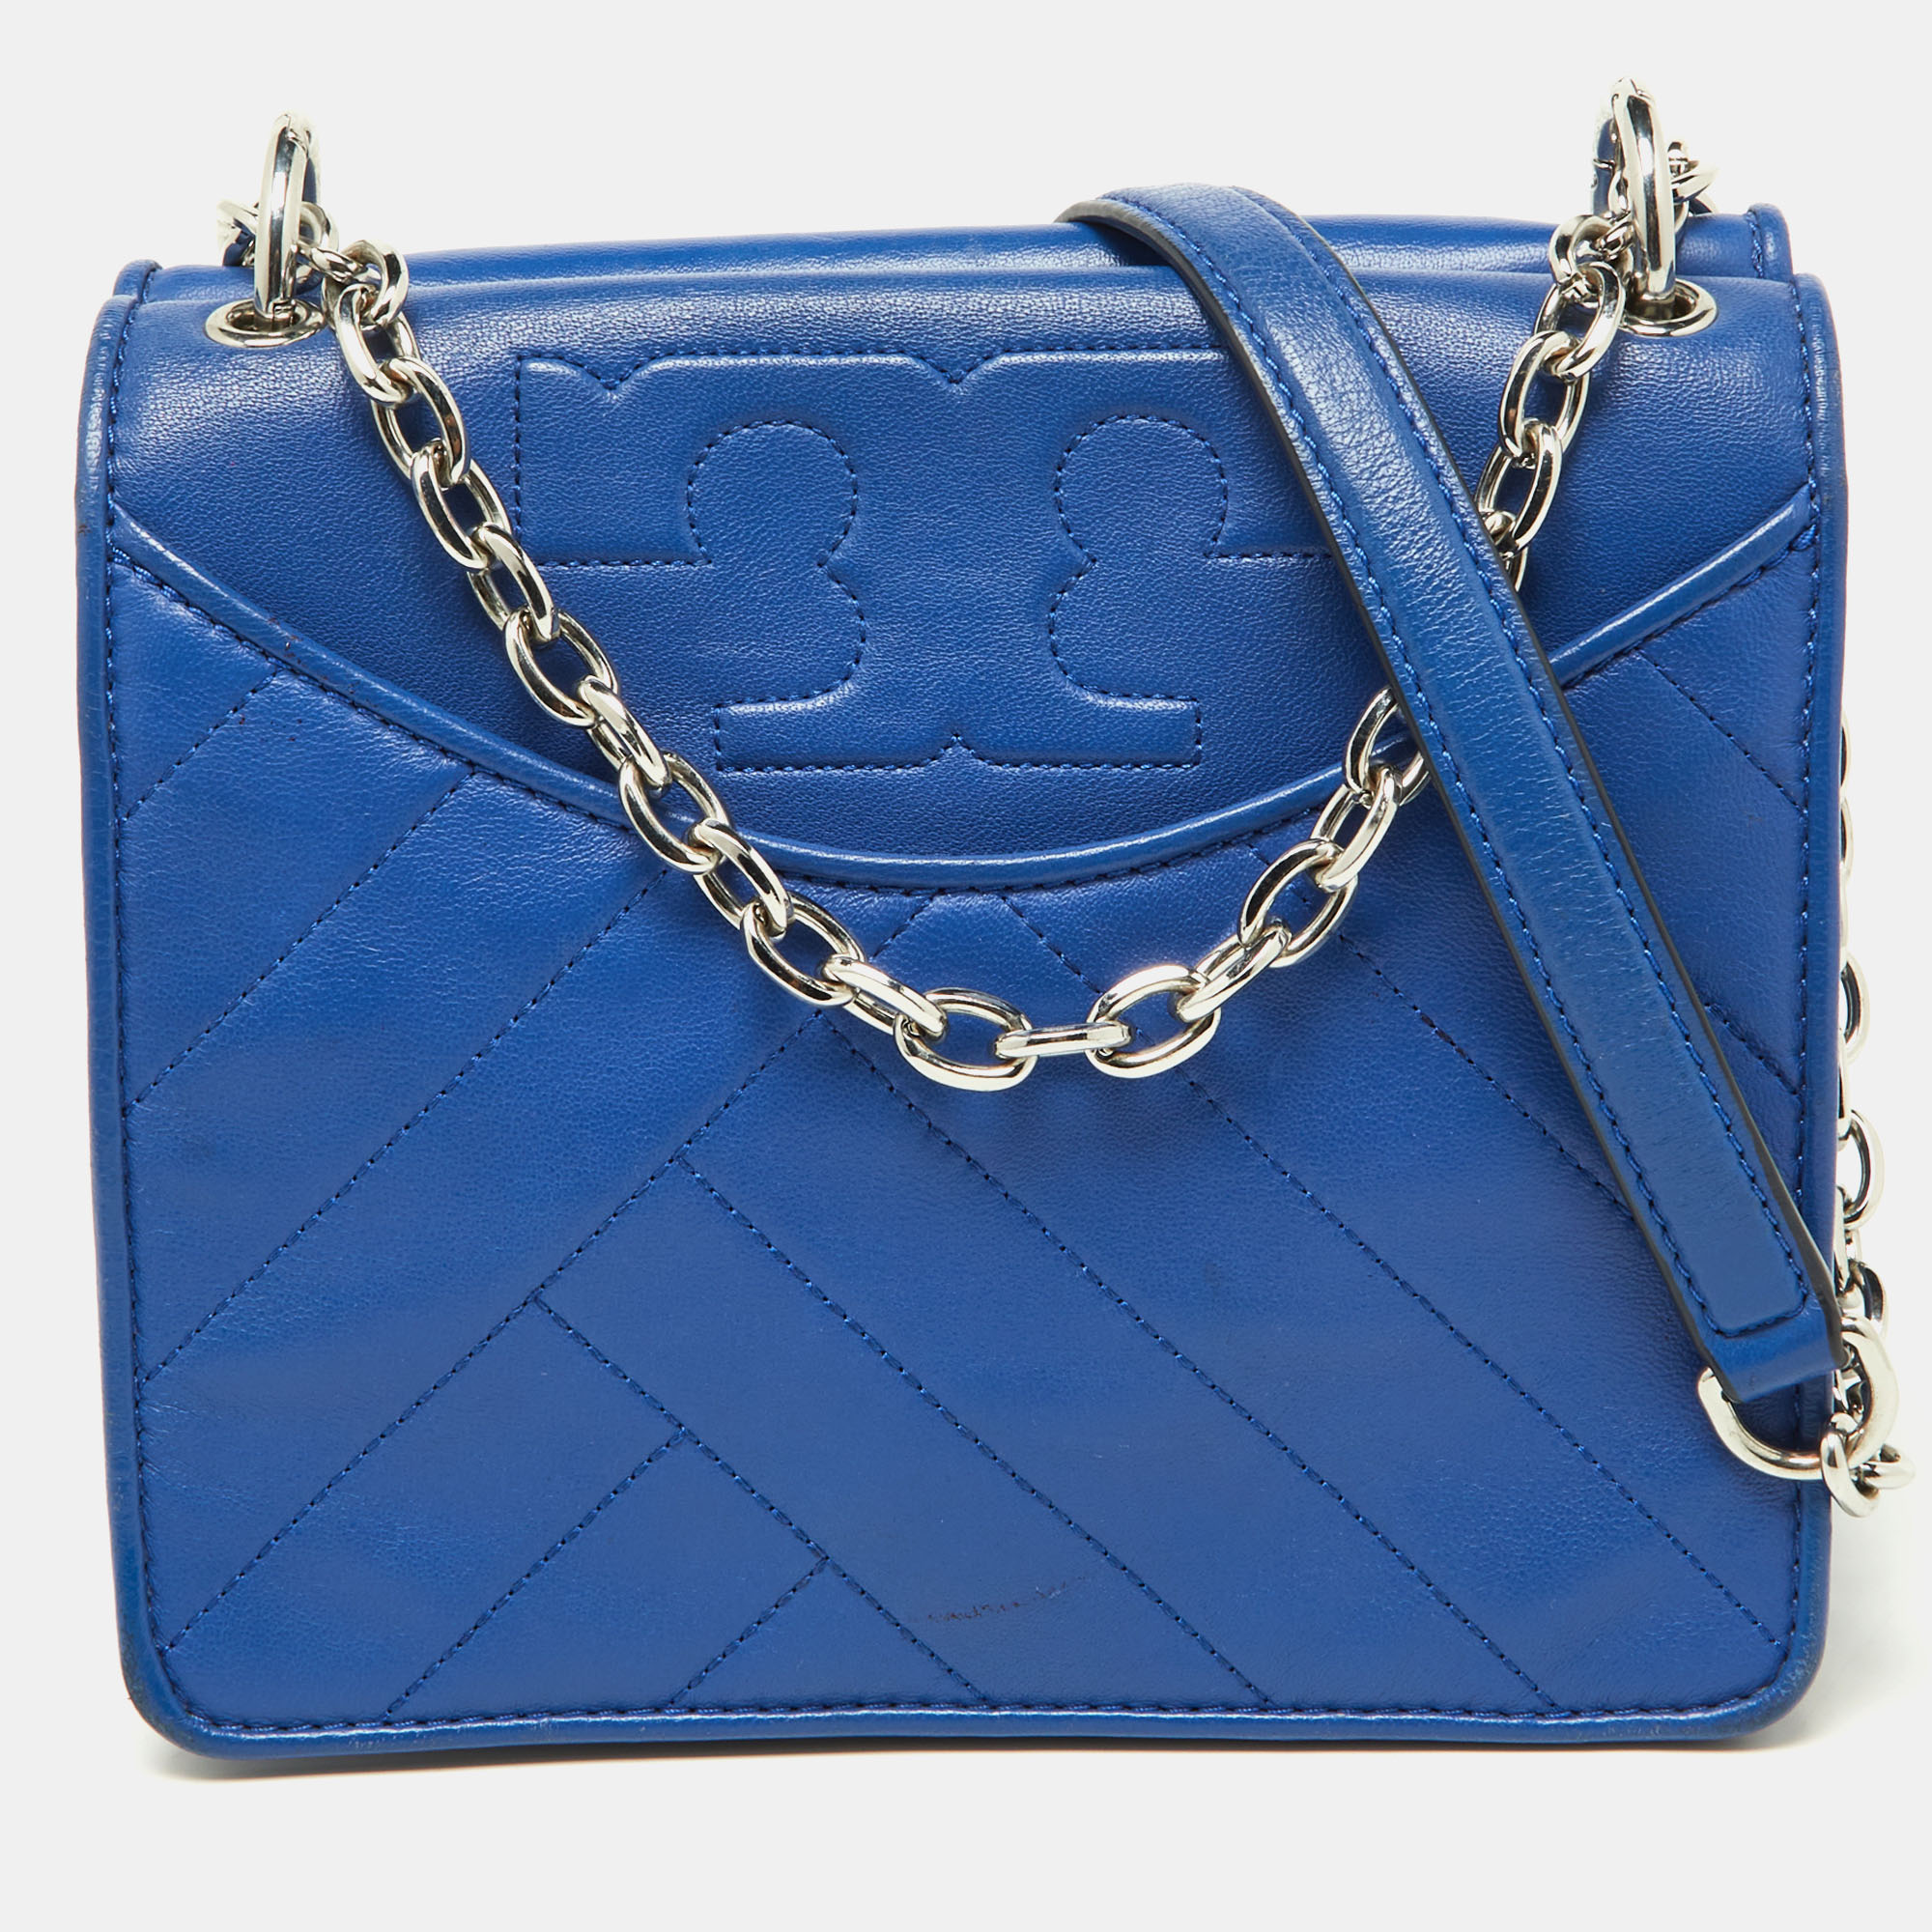 Pre-owned Tory Burch Blue Leather Alexa Shoulder Bag